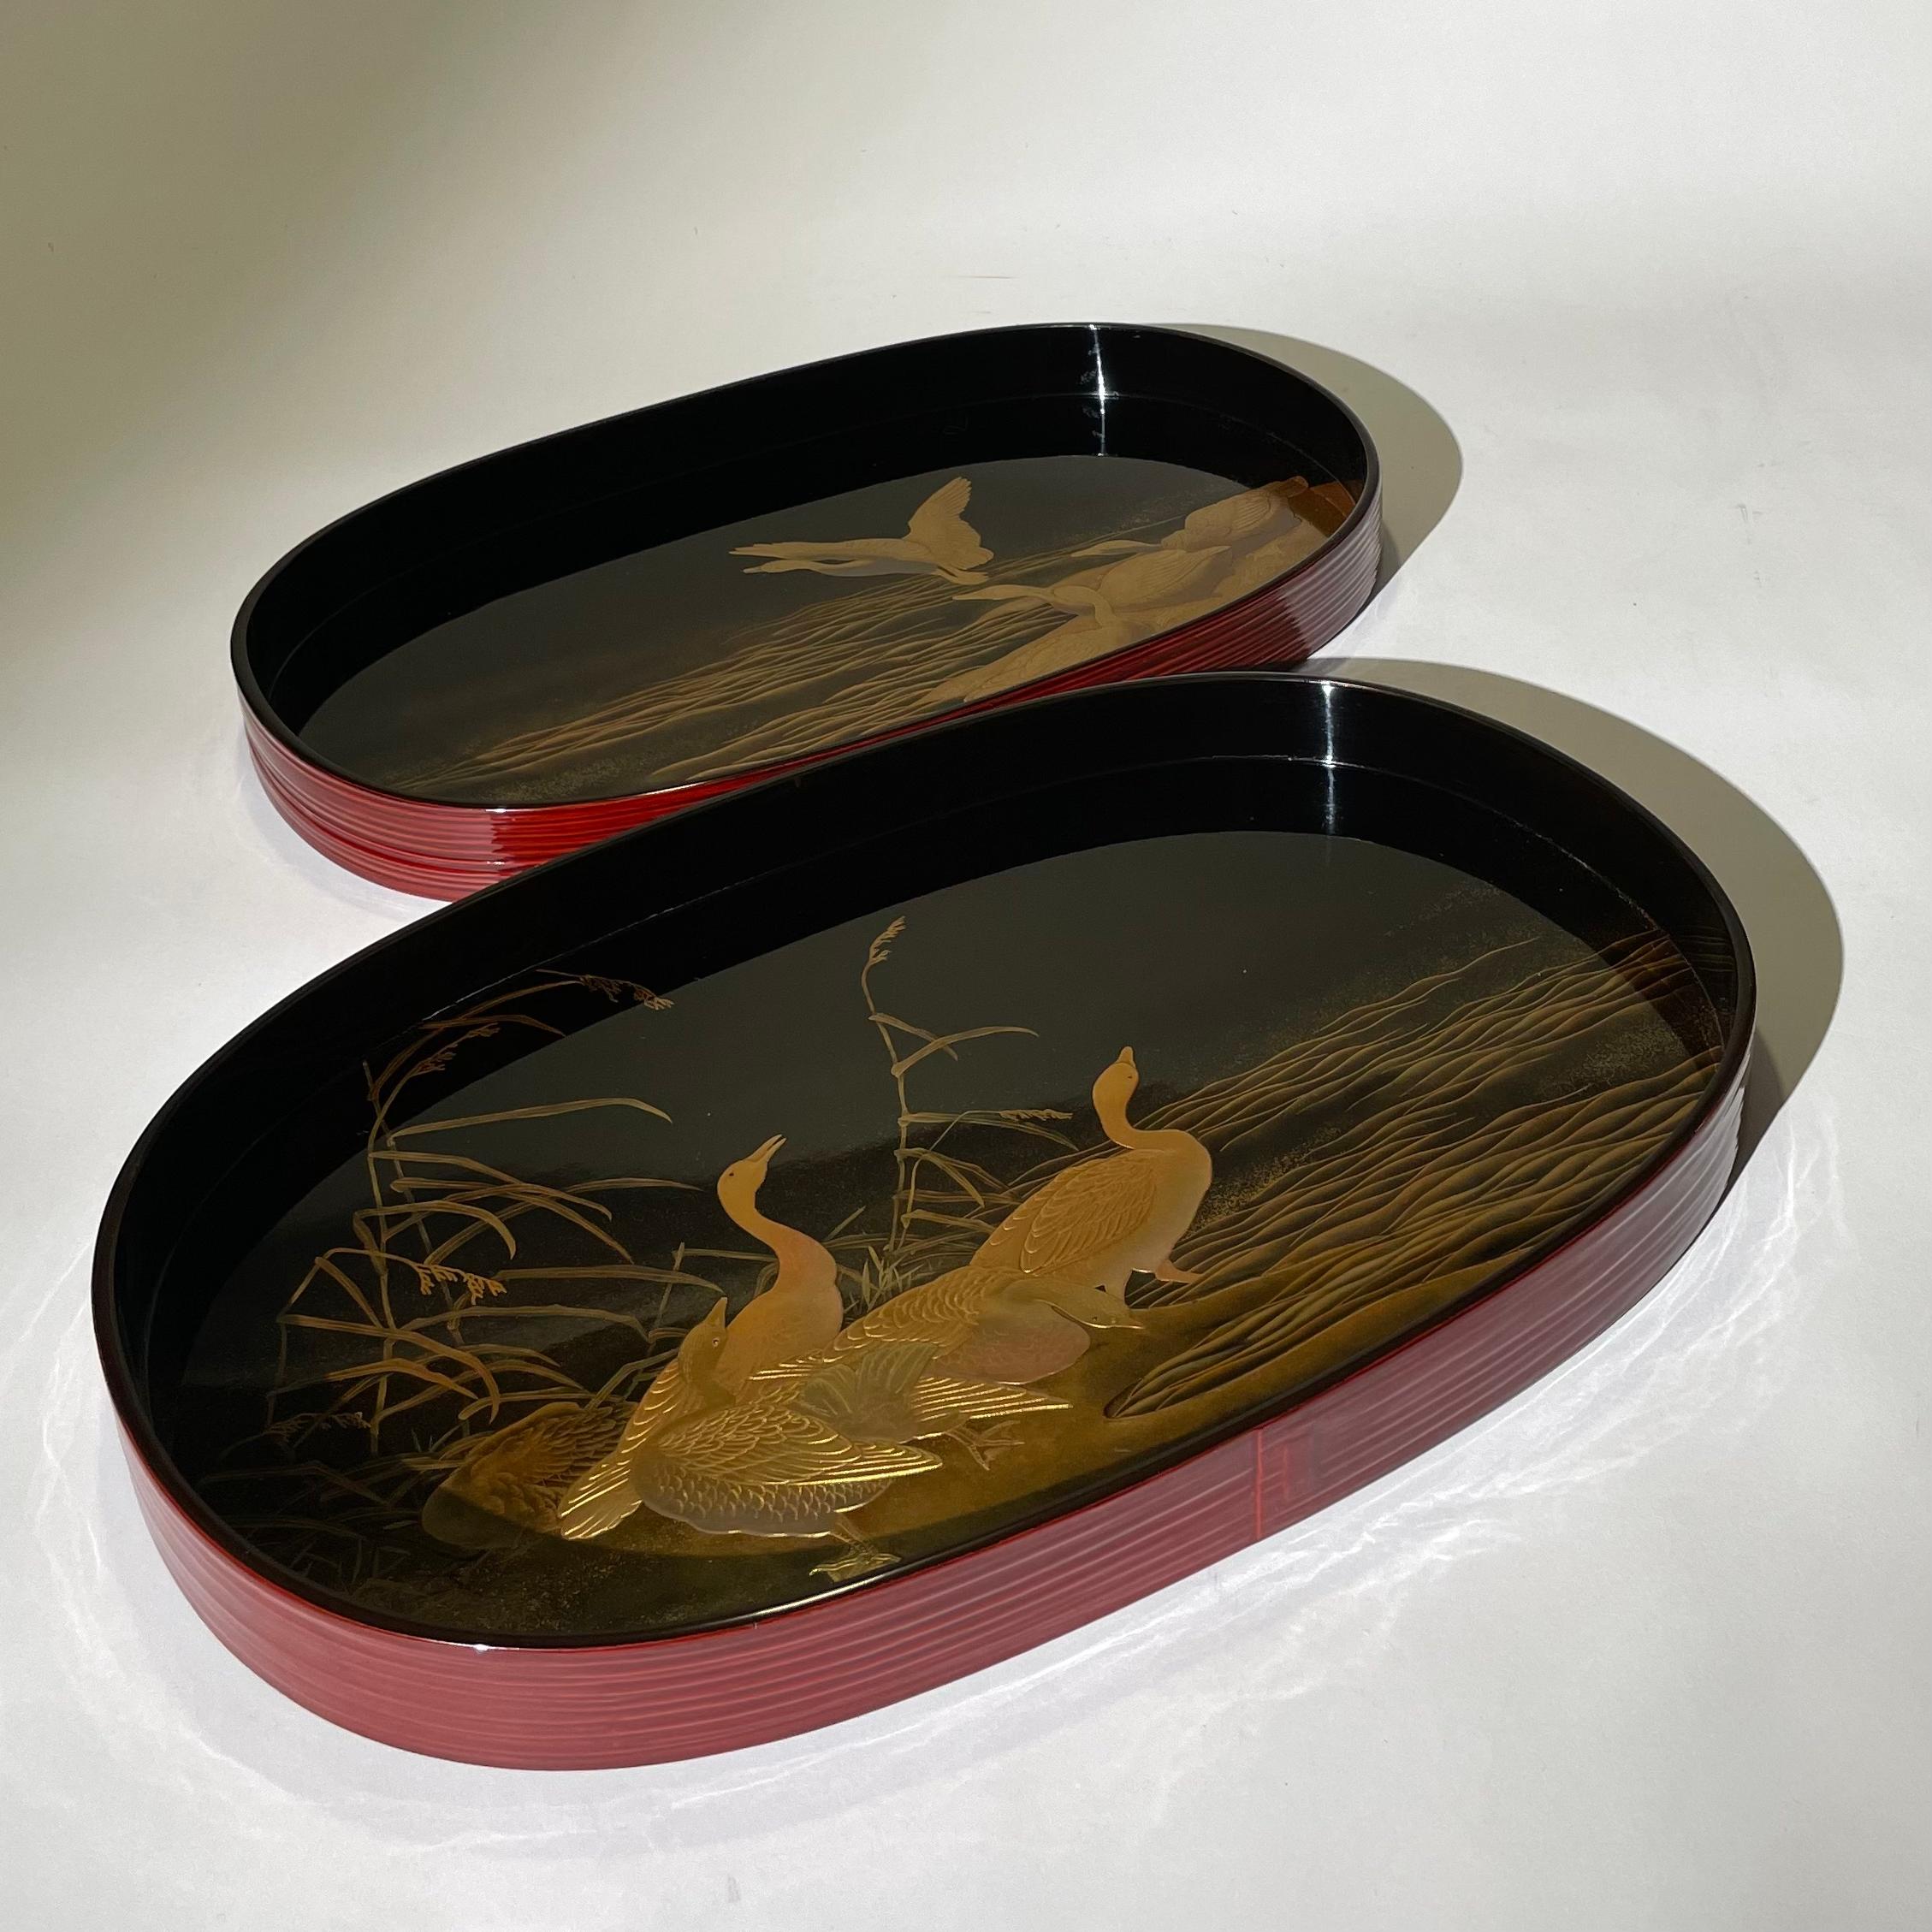 Japanese lacquer tray with the wild goose, reed, and wave design. This pair of tray is a fine example of multiple lacquer techniques using gold, hiramaki-e, takamaki-e, and togidashi. 

Wave and reed feature are expressed with the technique of